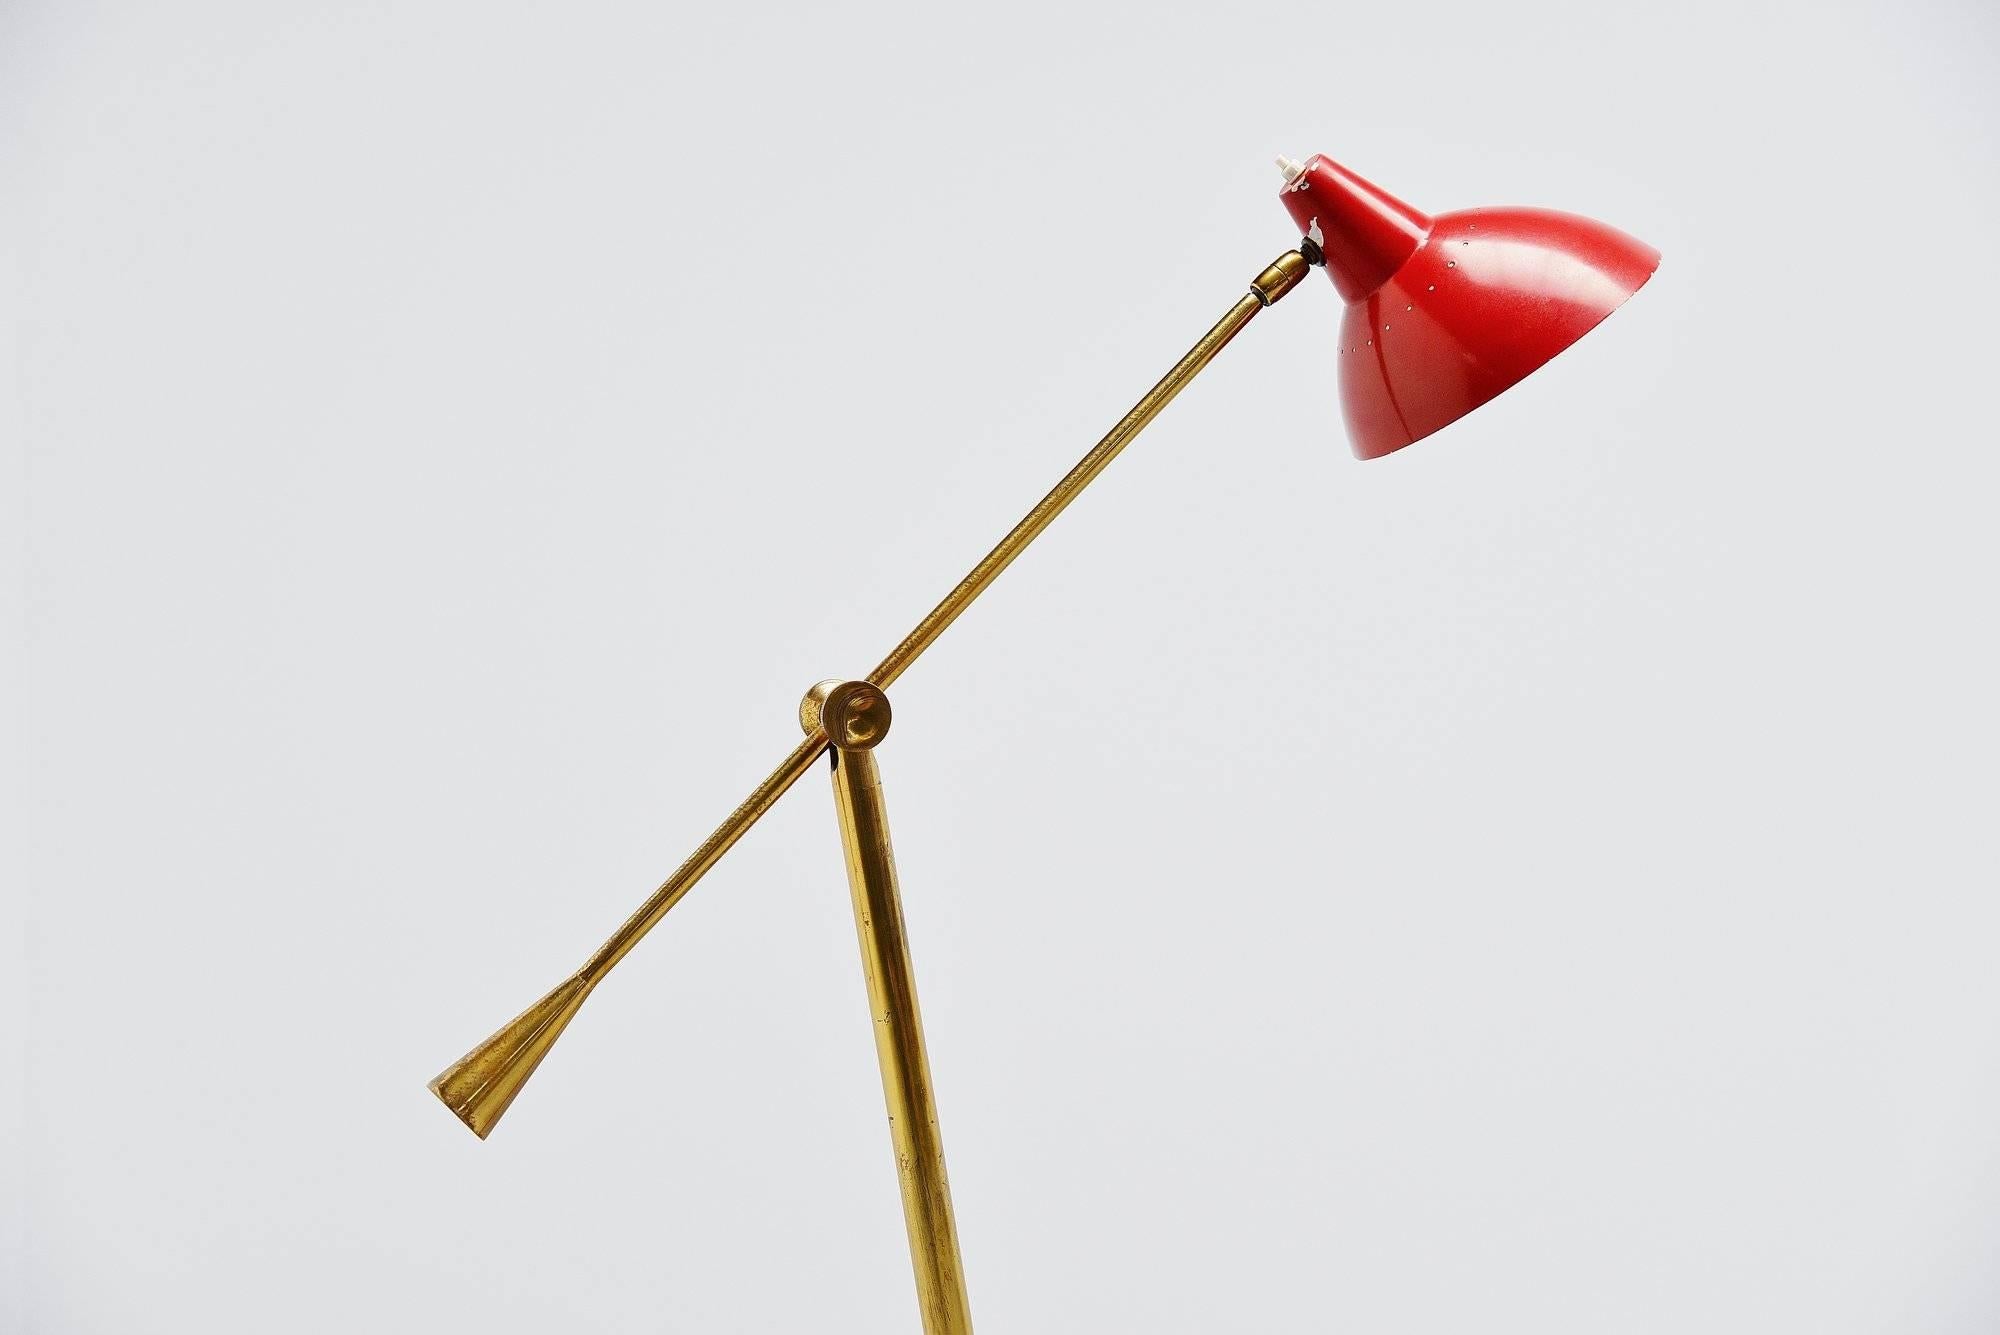 Very nice and typical Italian shaped floor lamp by Stilnovo, Italy, 1950. The base has a round brown marble base and a brass arm with weight for the balance. The shade is originally red painted. This lamp can be used as a reading lamp easily and